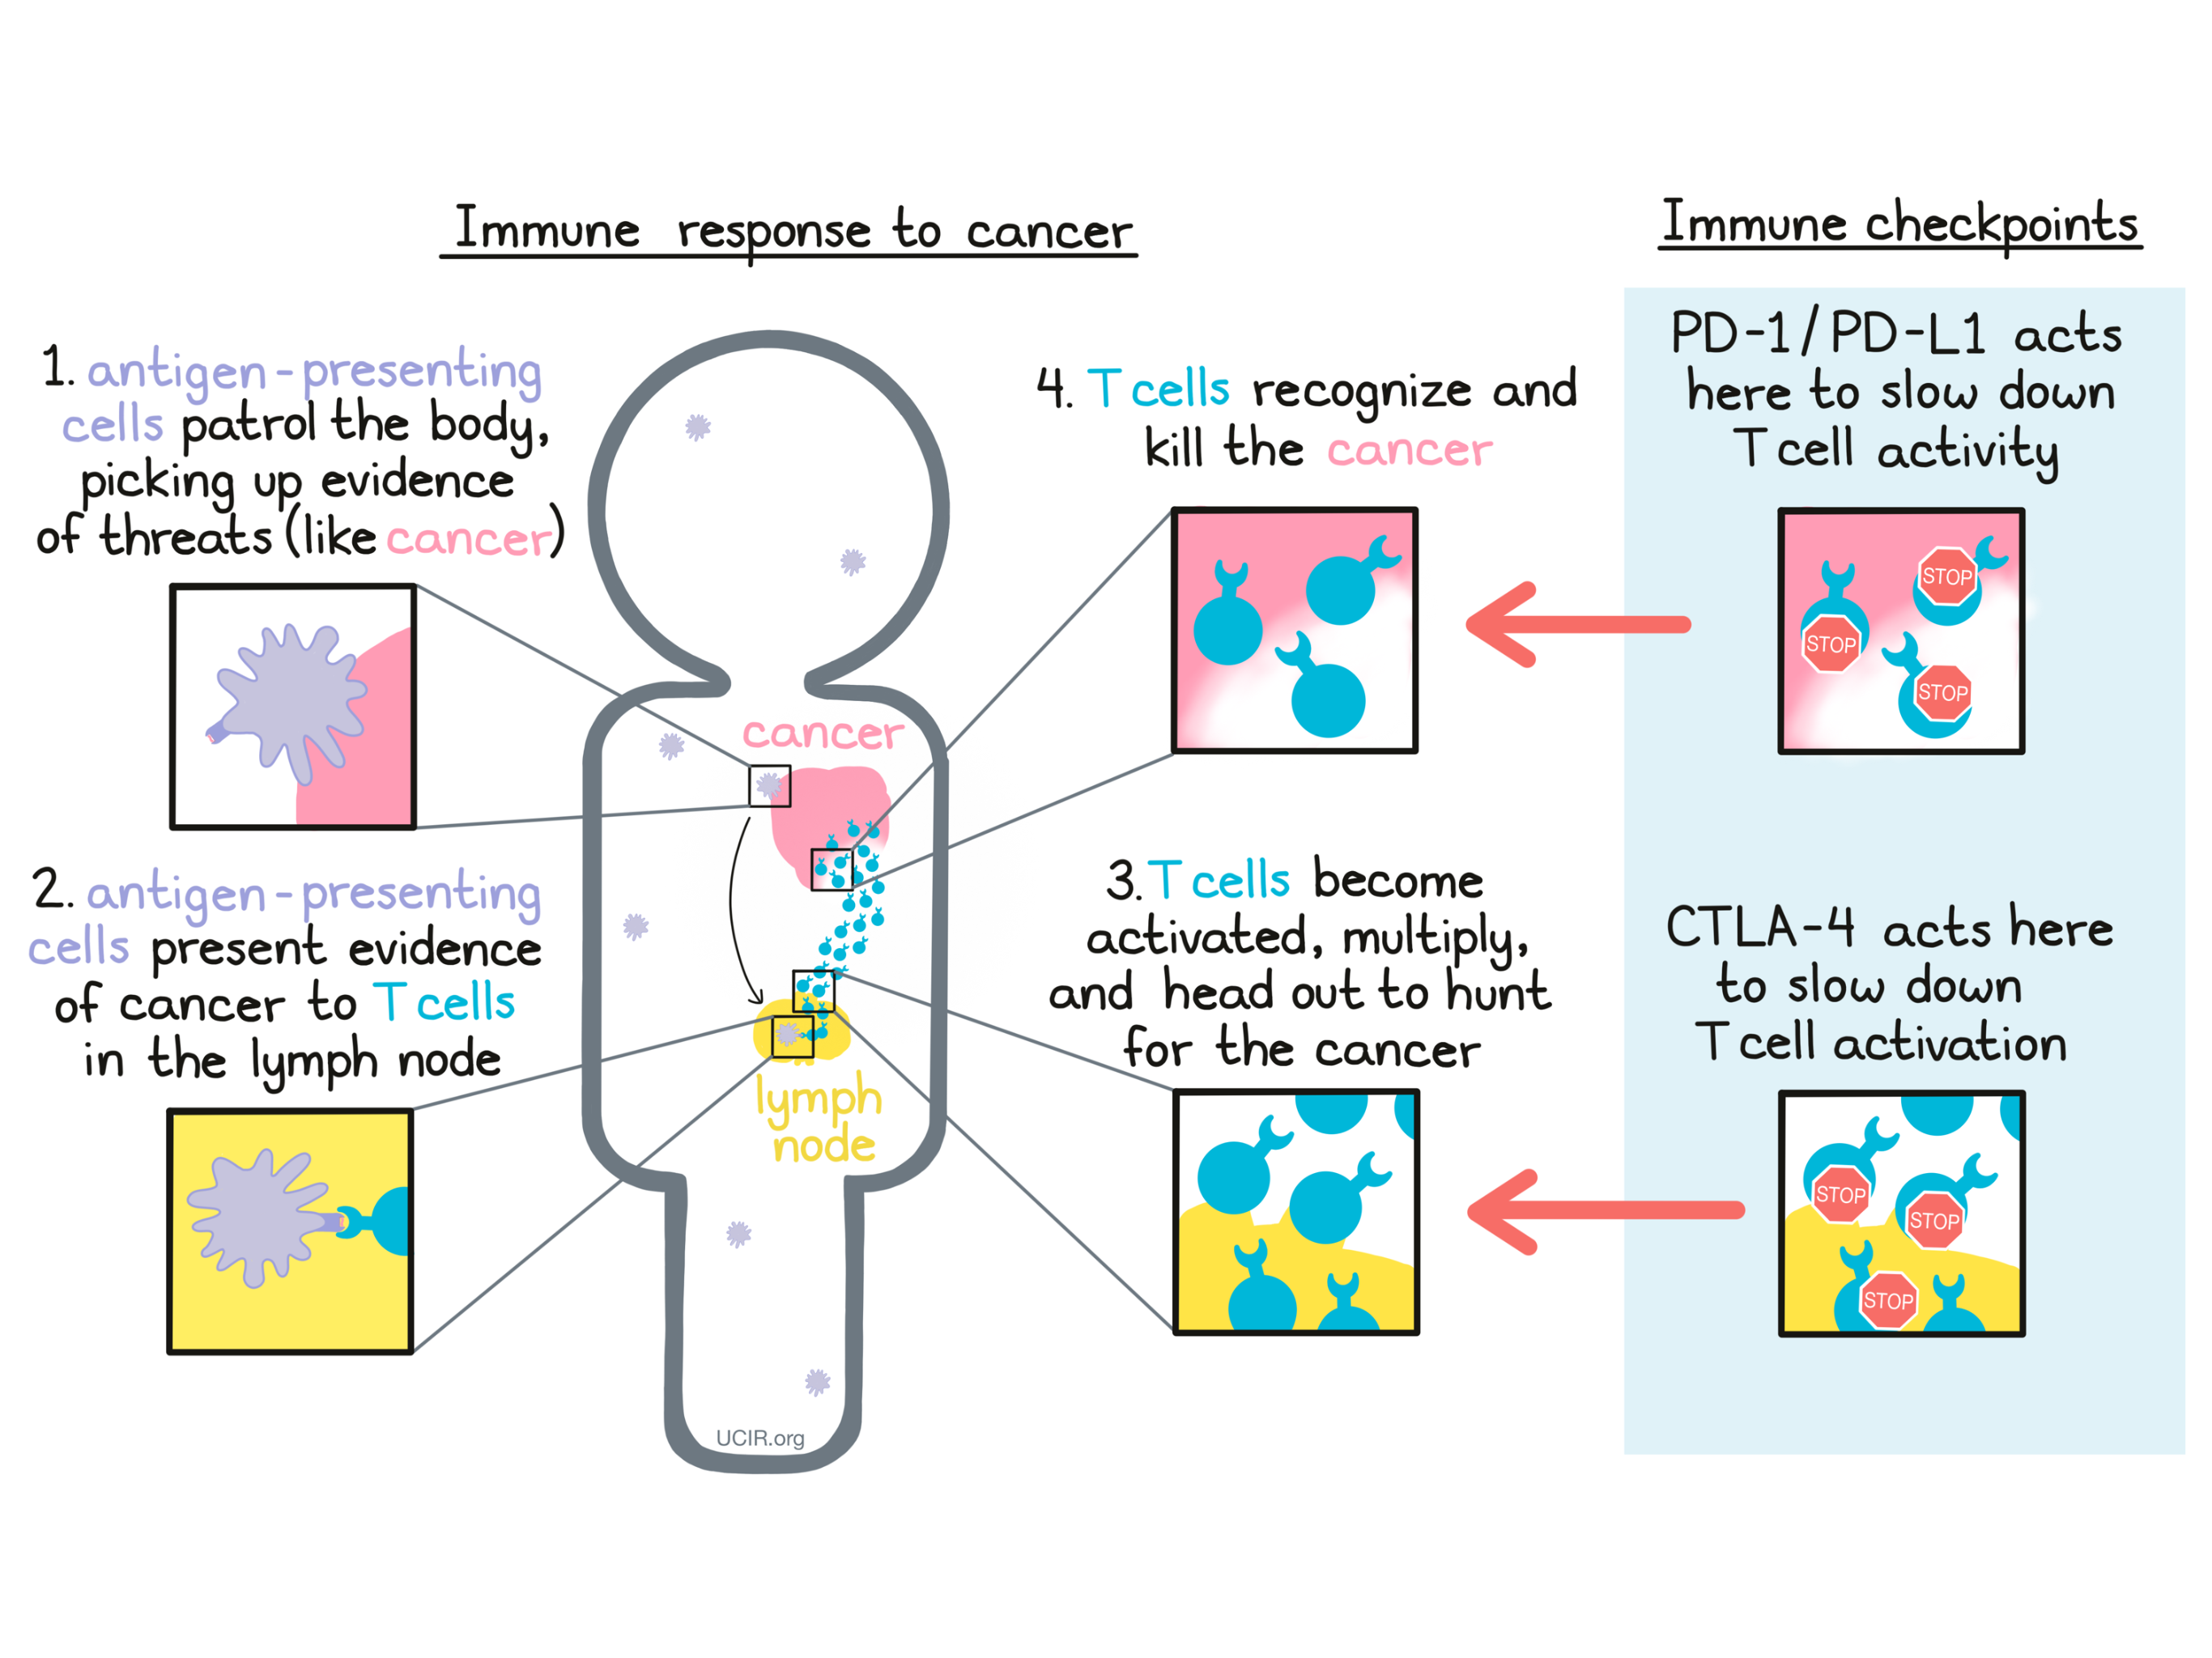 Illustration that shows an immune response to cancer